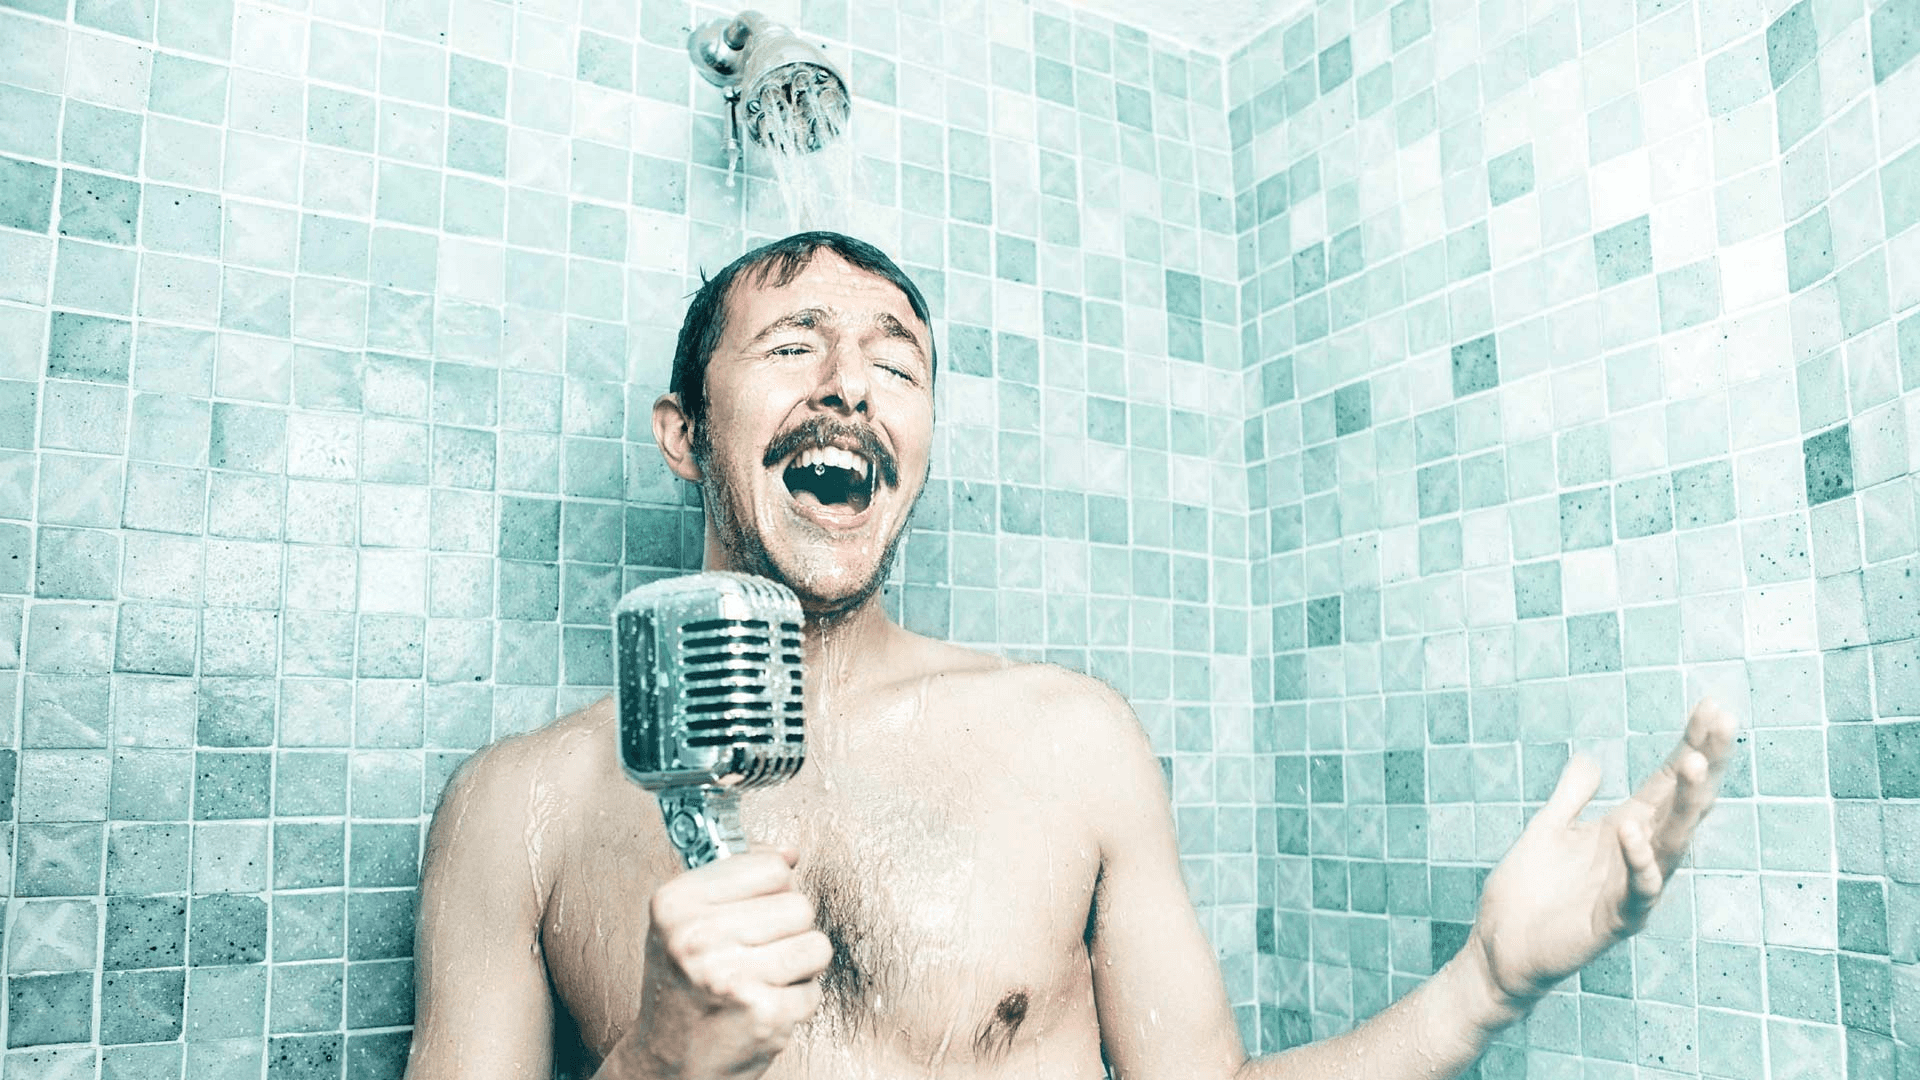 Could this be the ultimate shower experience?